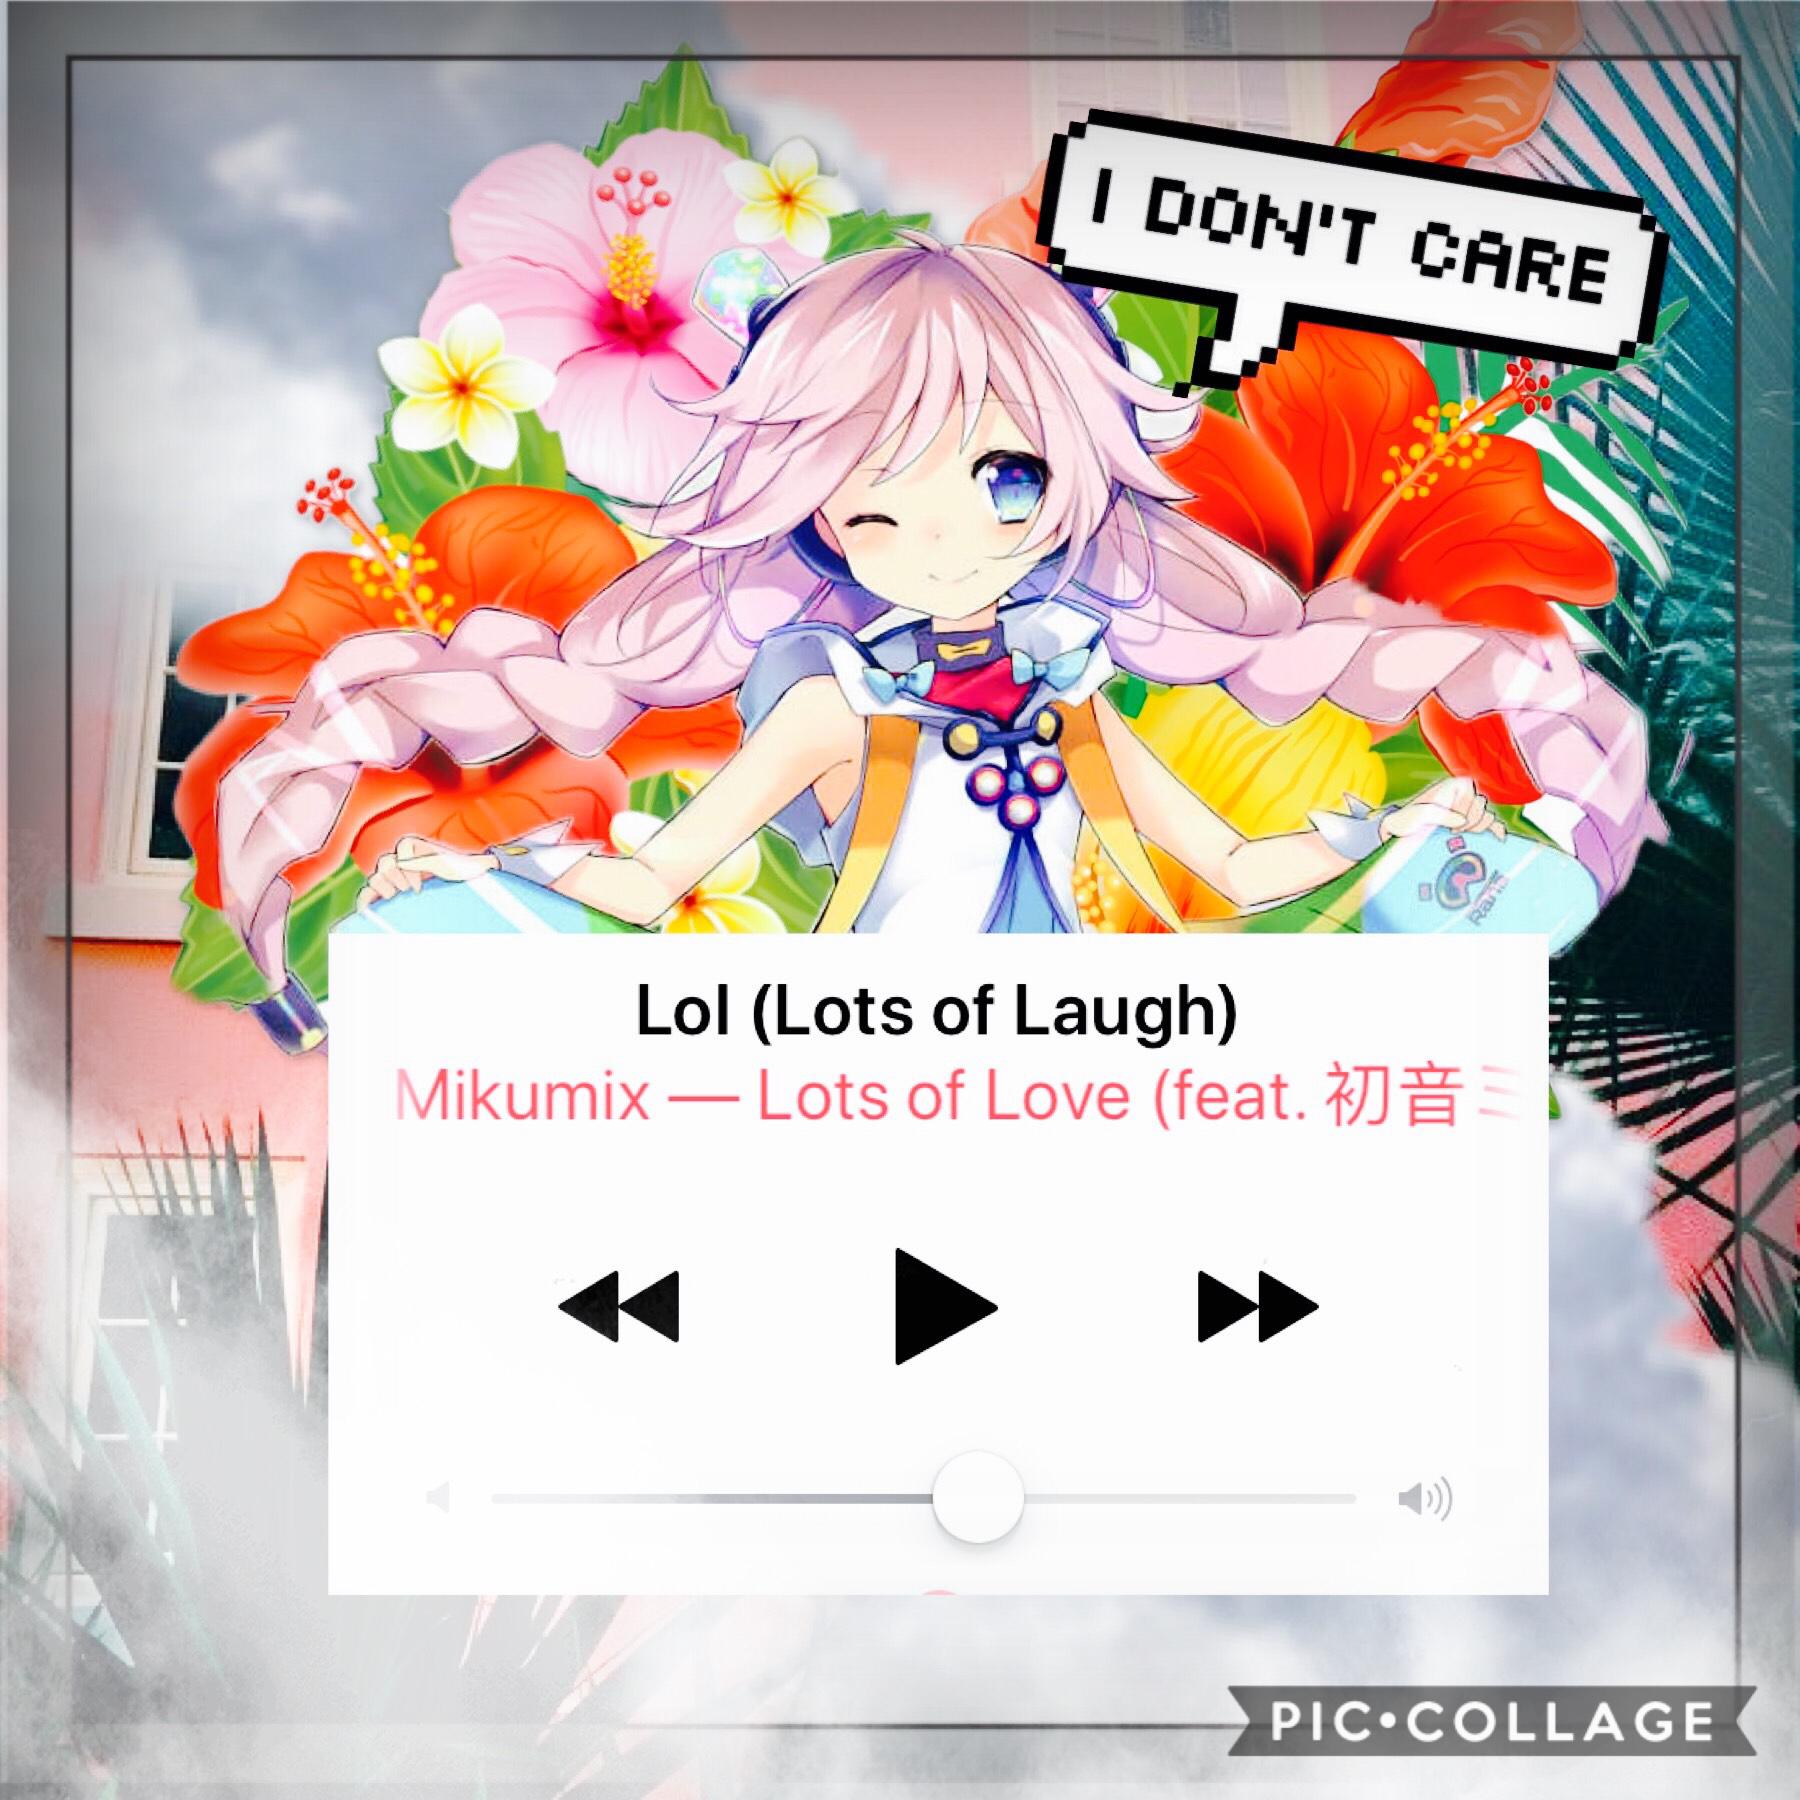 Break My Heart❤️
“Rana doesn’t even sing that song, it even says Mikumix” 
I don’t care😊 I still really like this edit, and I haven’t used Rana for anything in forever(fun fact: i used this image for someone’s icon a few months ago, bc I REUSE. A LOT. 